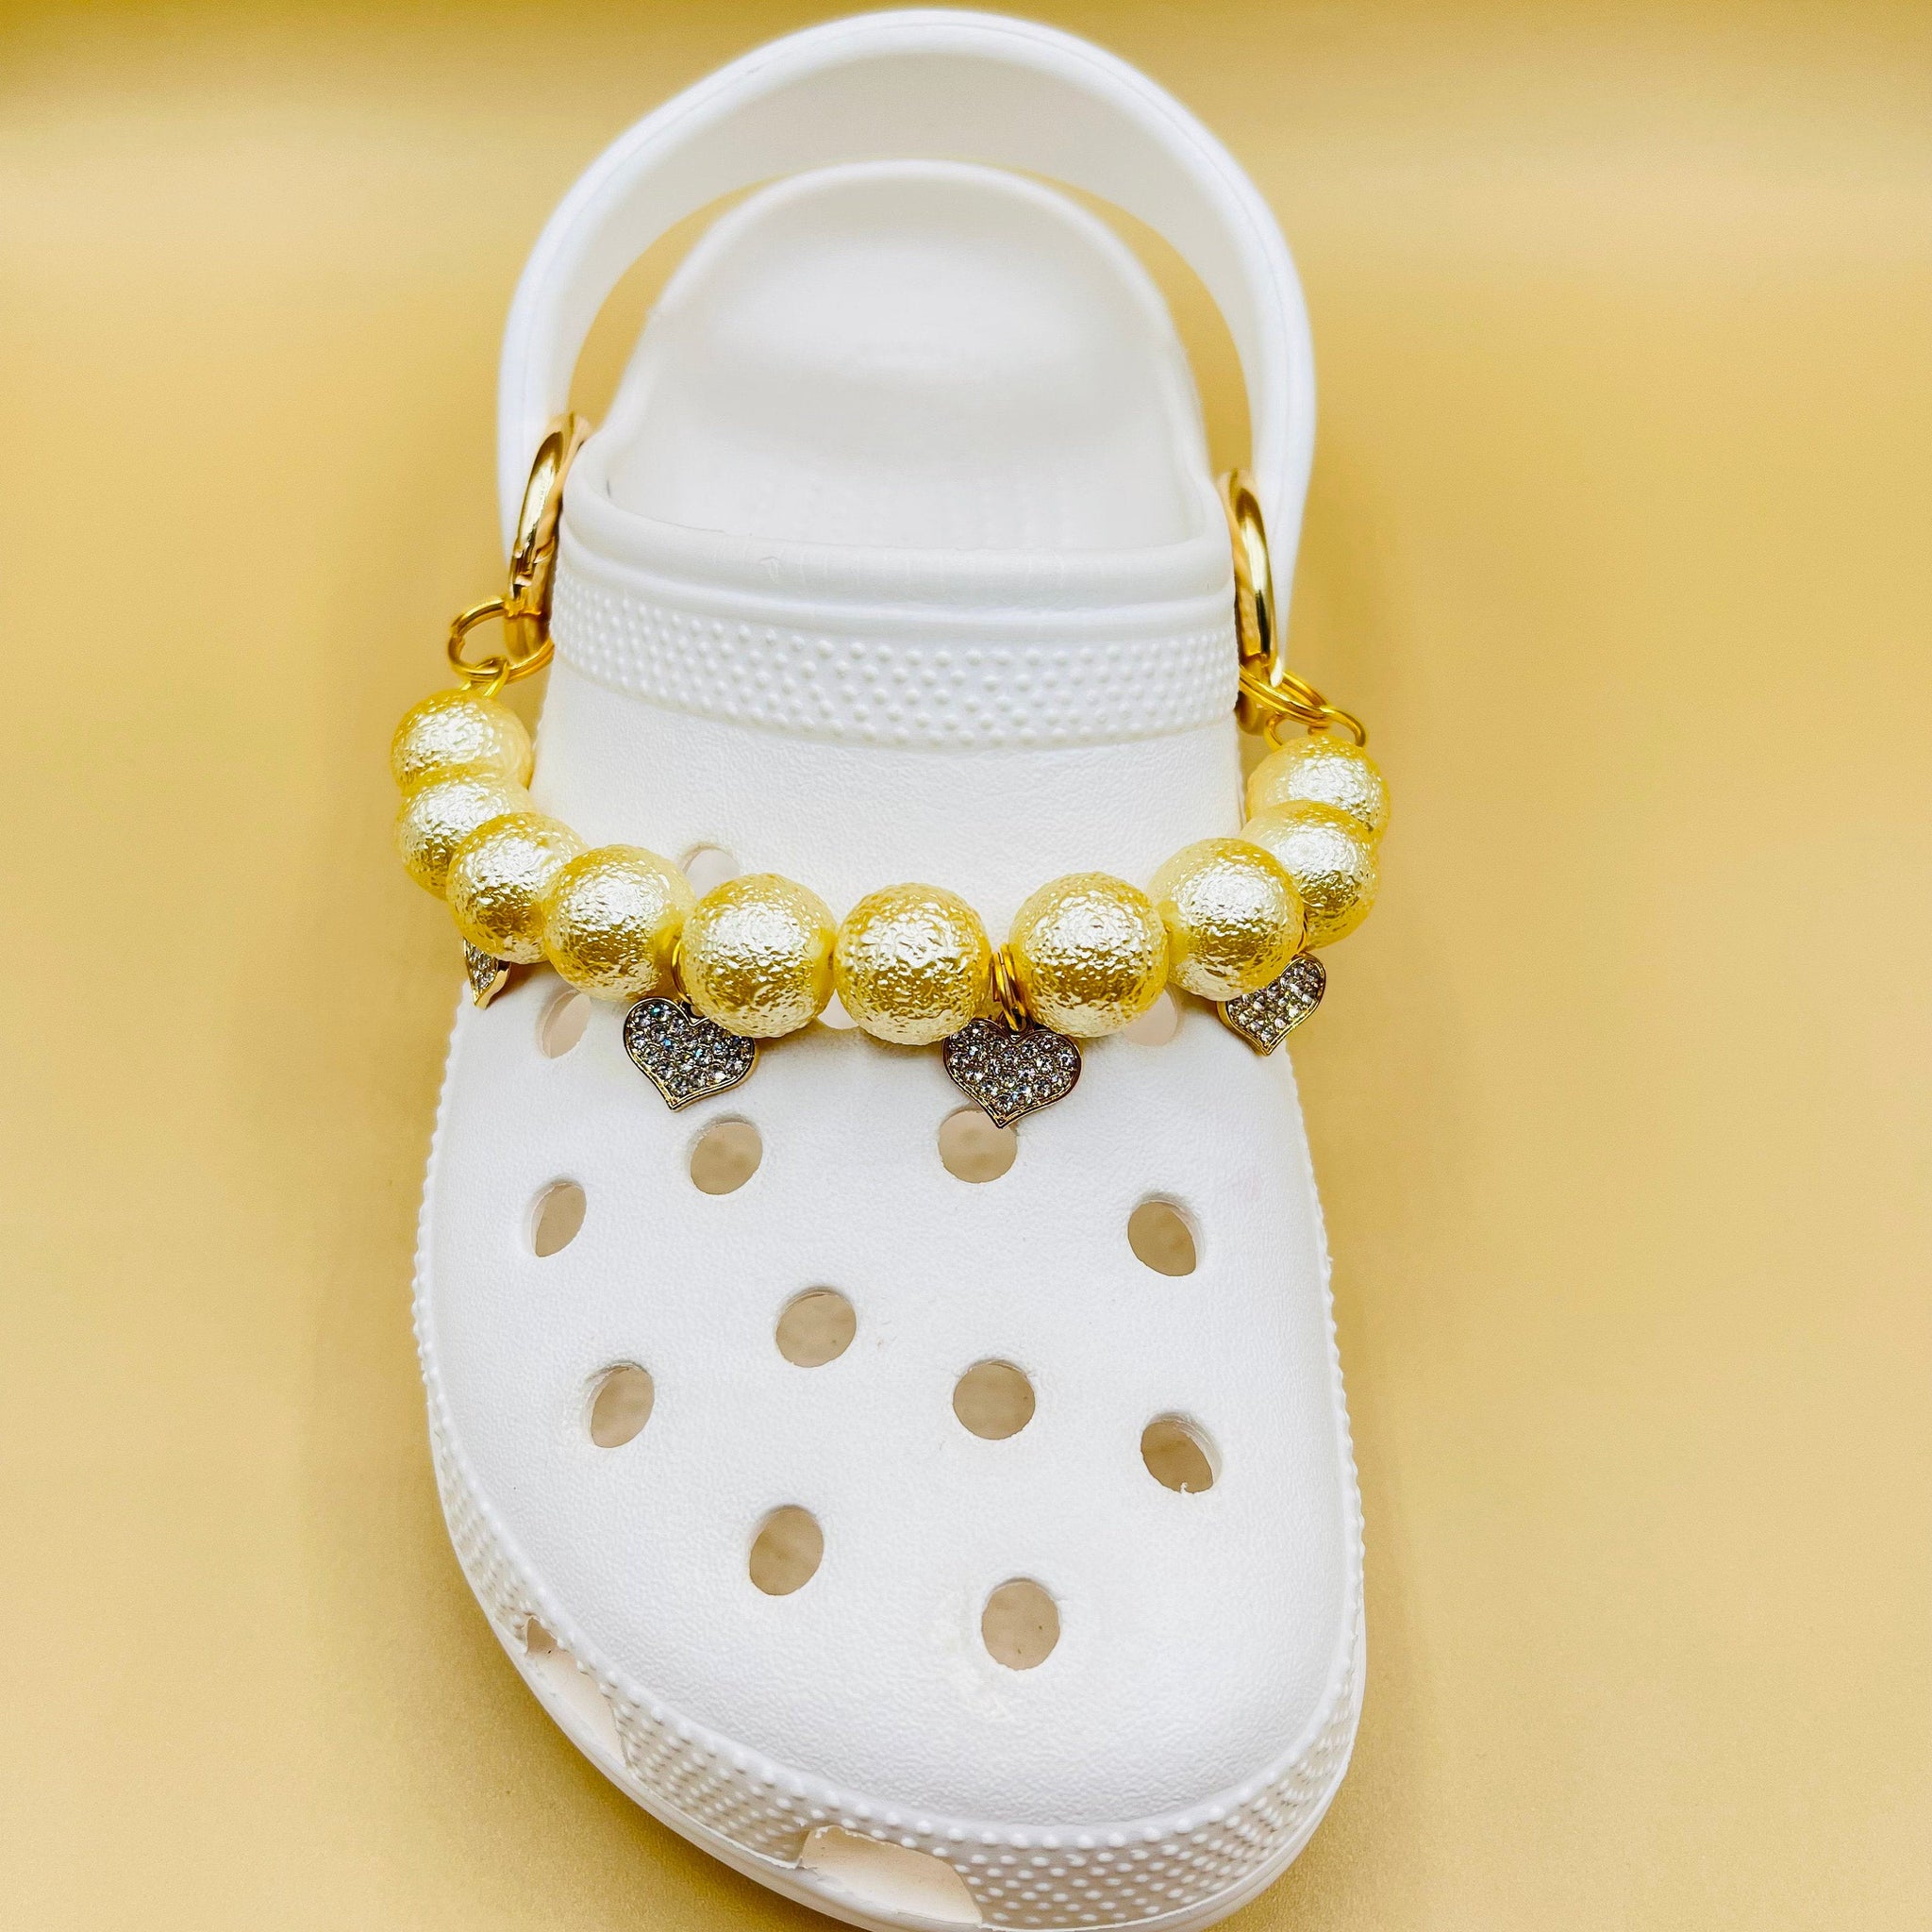 Luxury Gold/White Leather Chain Charms For Crocs. Suitable For Adult Crocs.